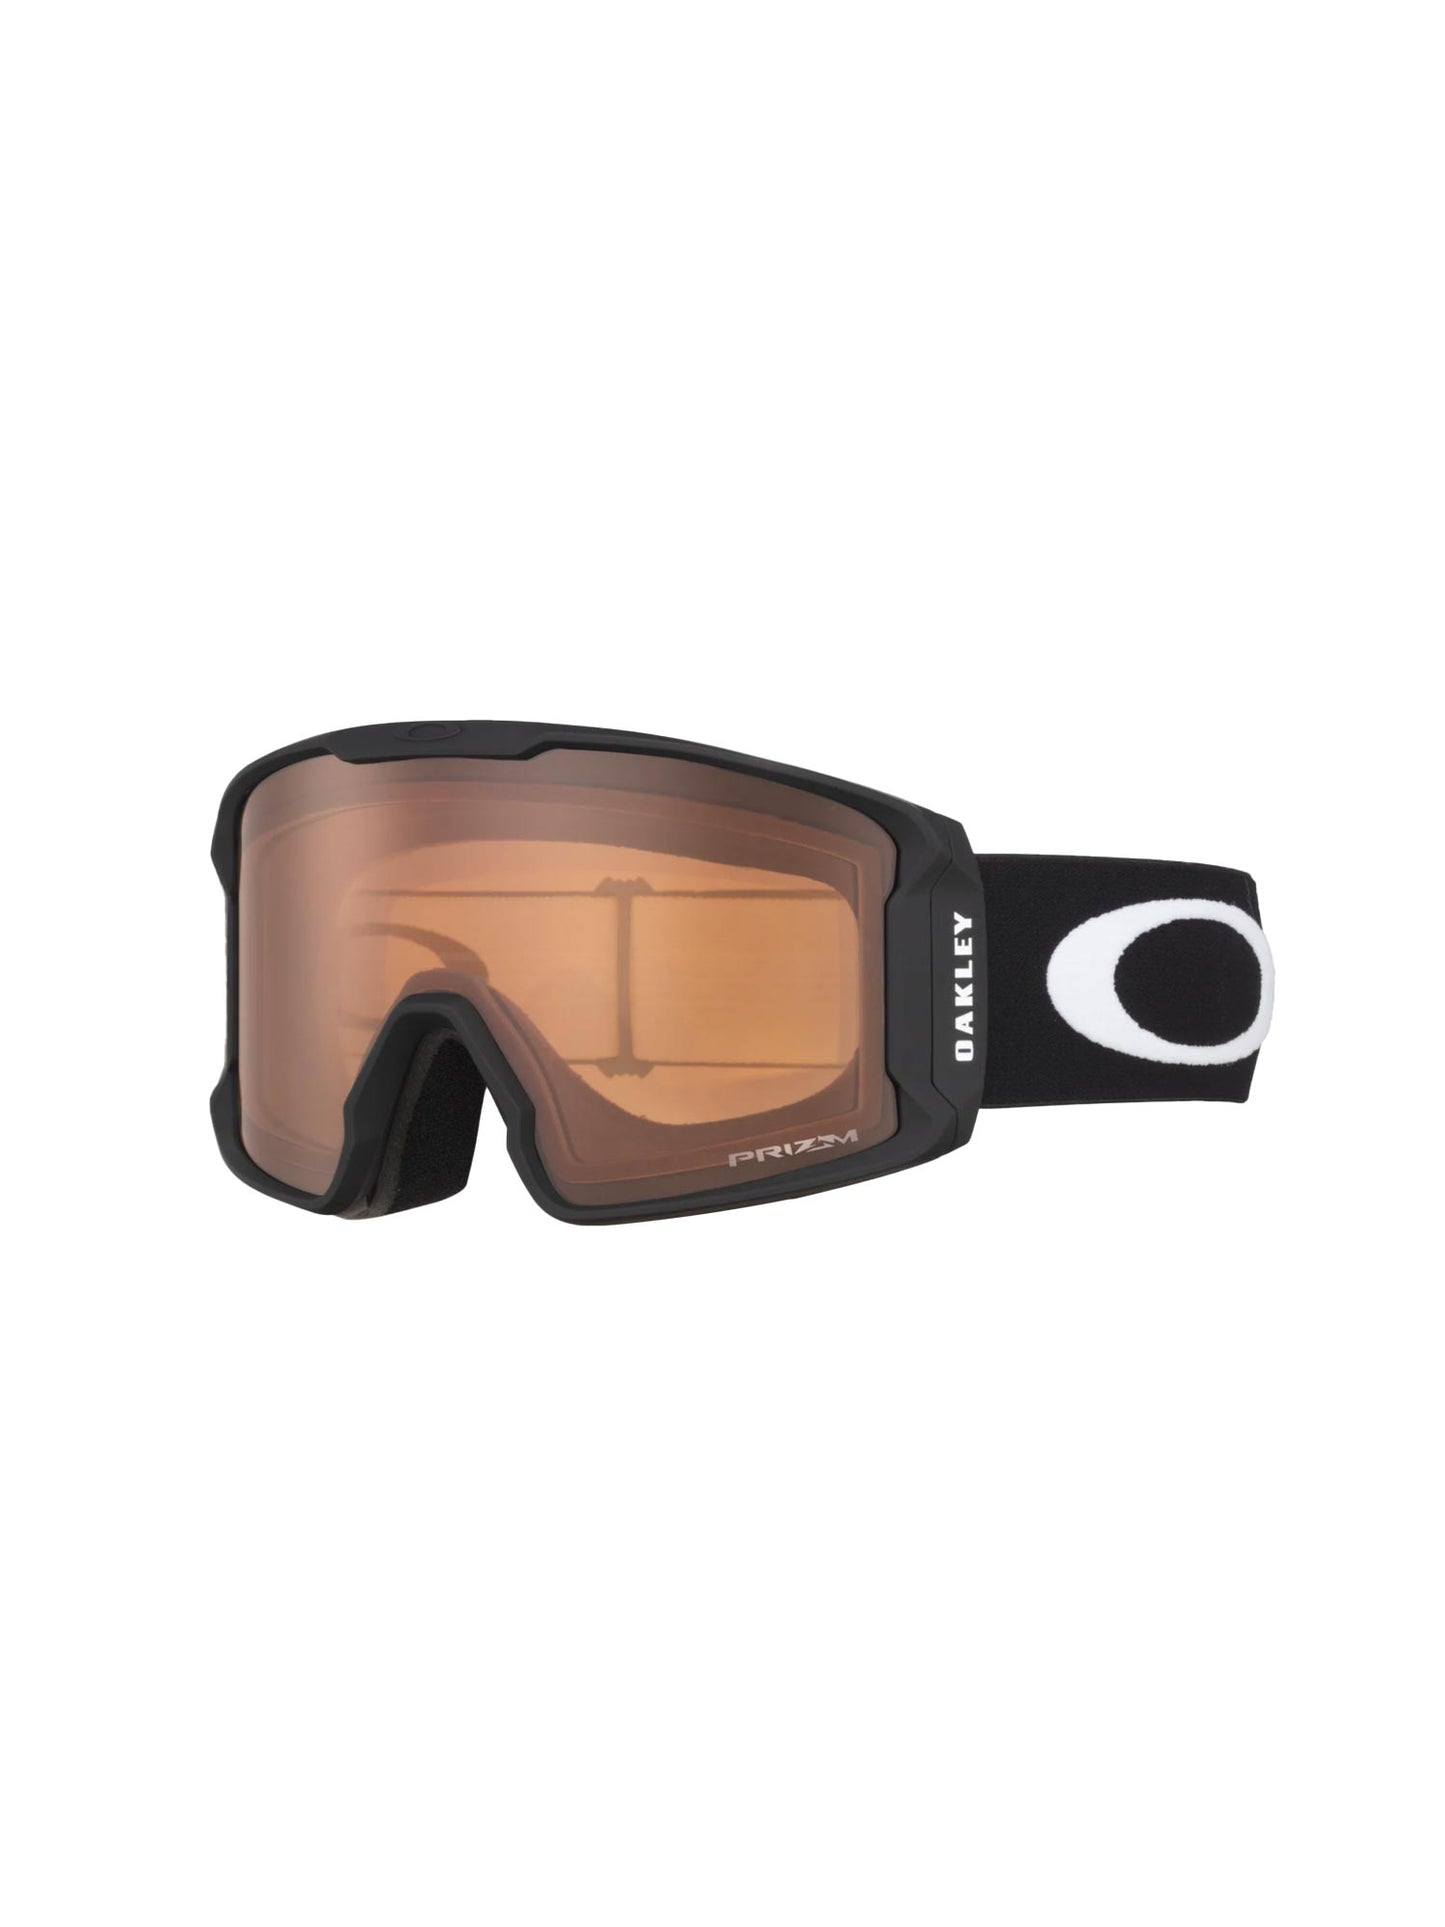 Oakley Line Miner L snow goggle with black strap and persimmon lens